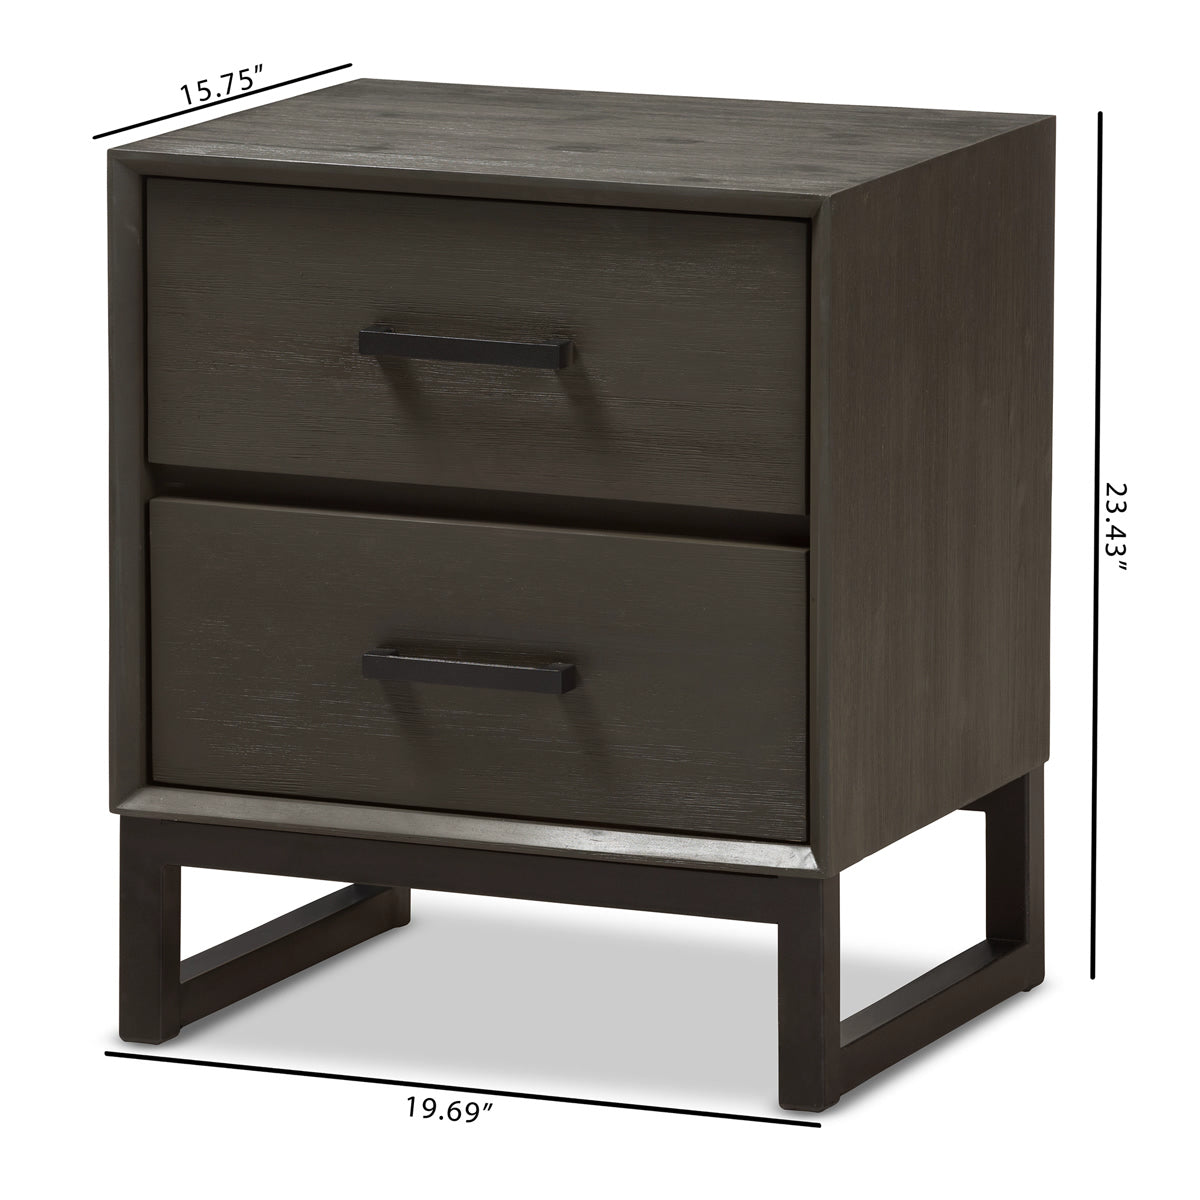 Baxton Studio Parris Rustic Grey Wood and Black Metal 2-Drawer Nightstand Baxton Studio-nightstands-Minimal And Modern - 2